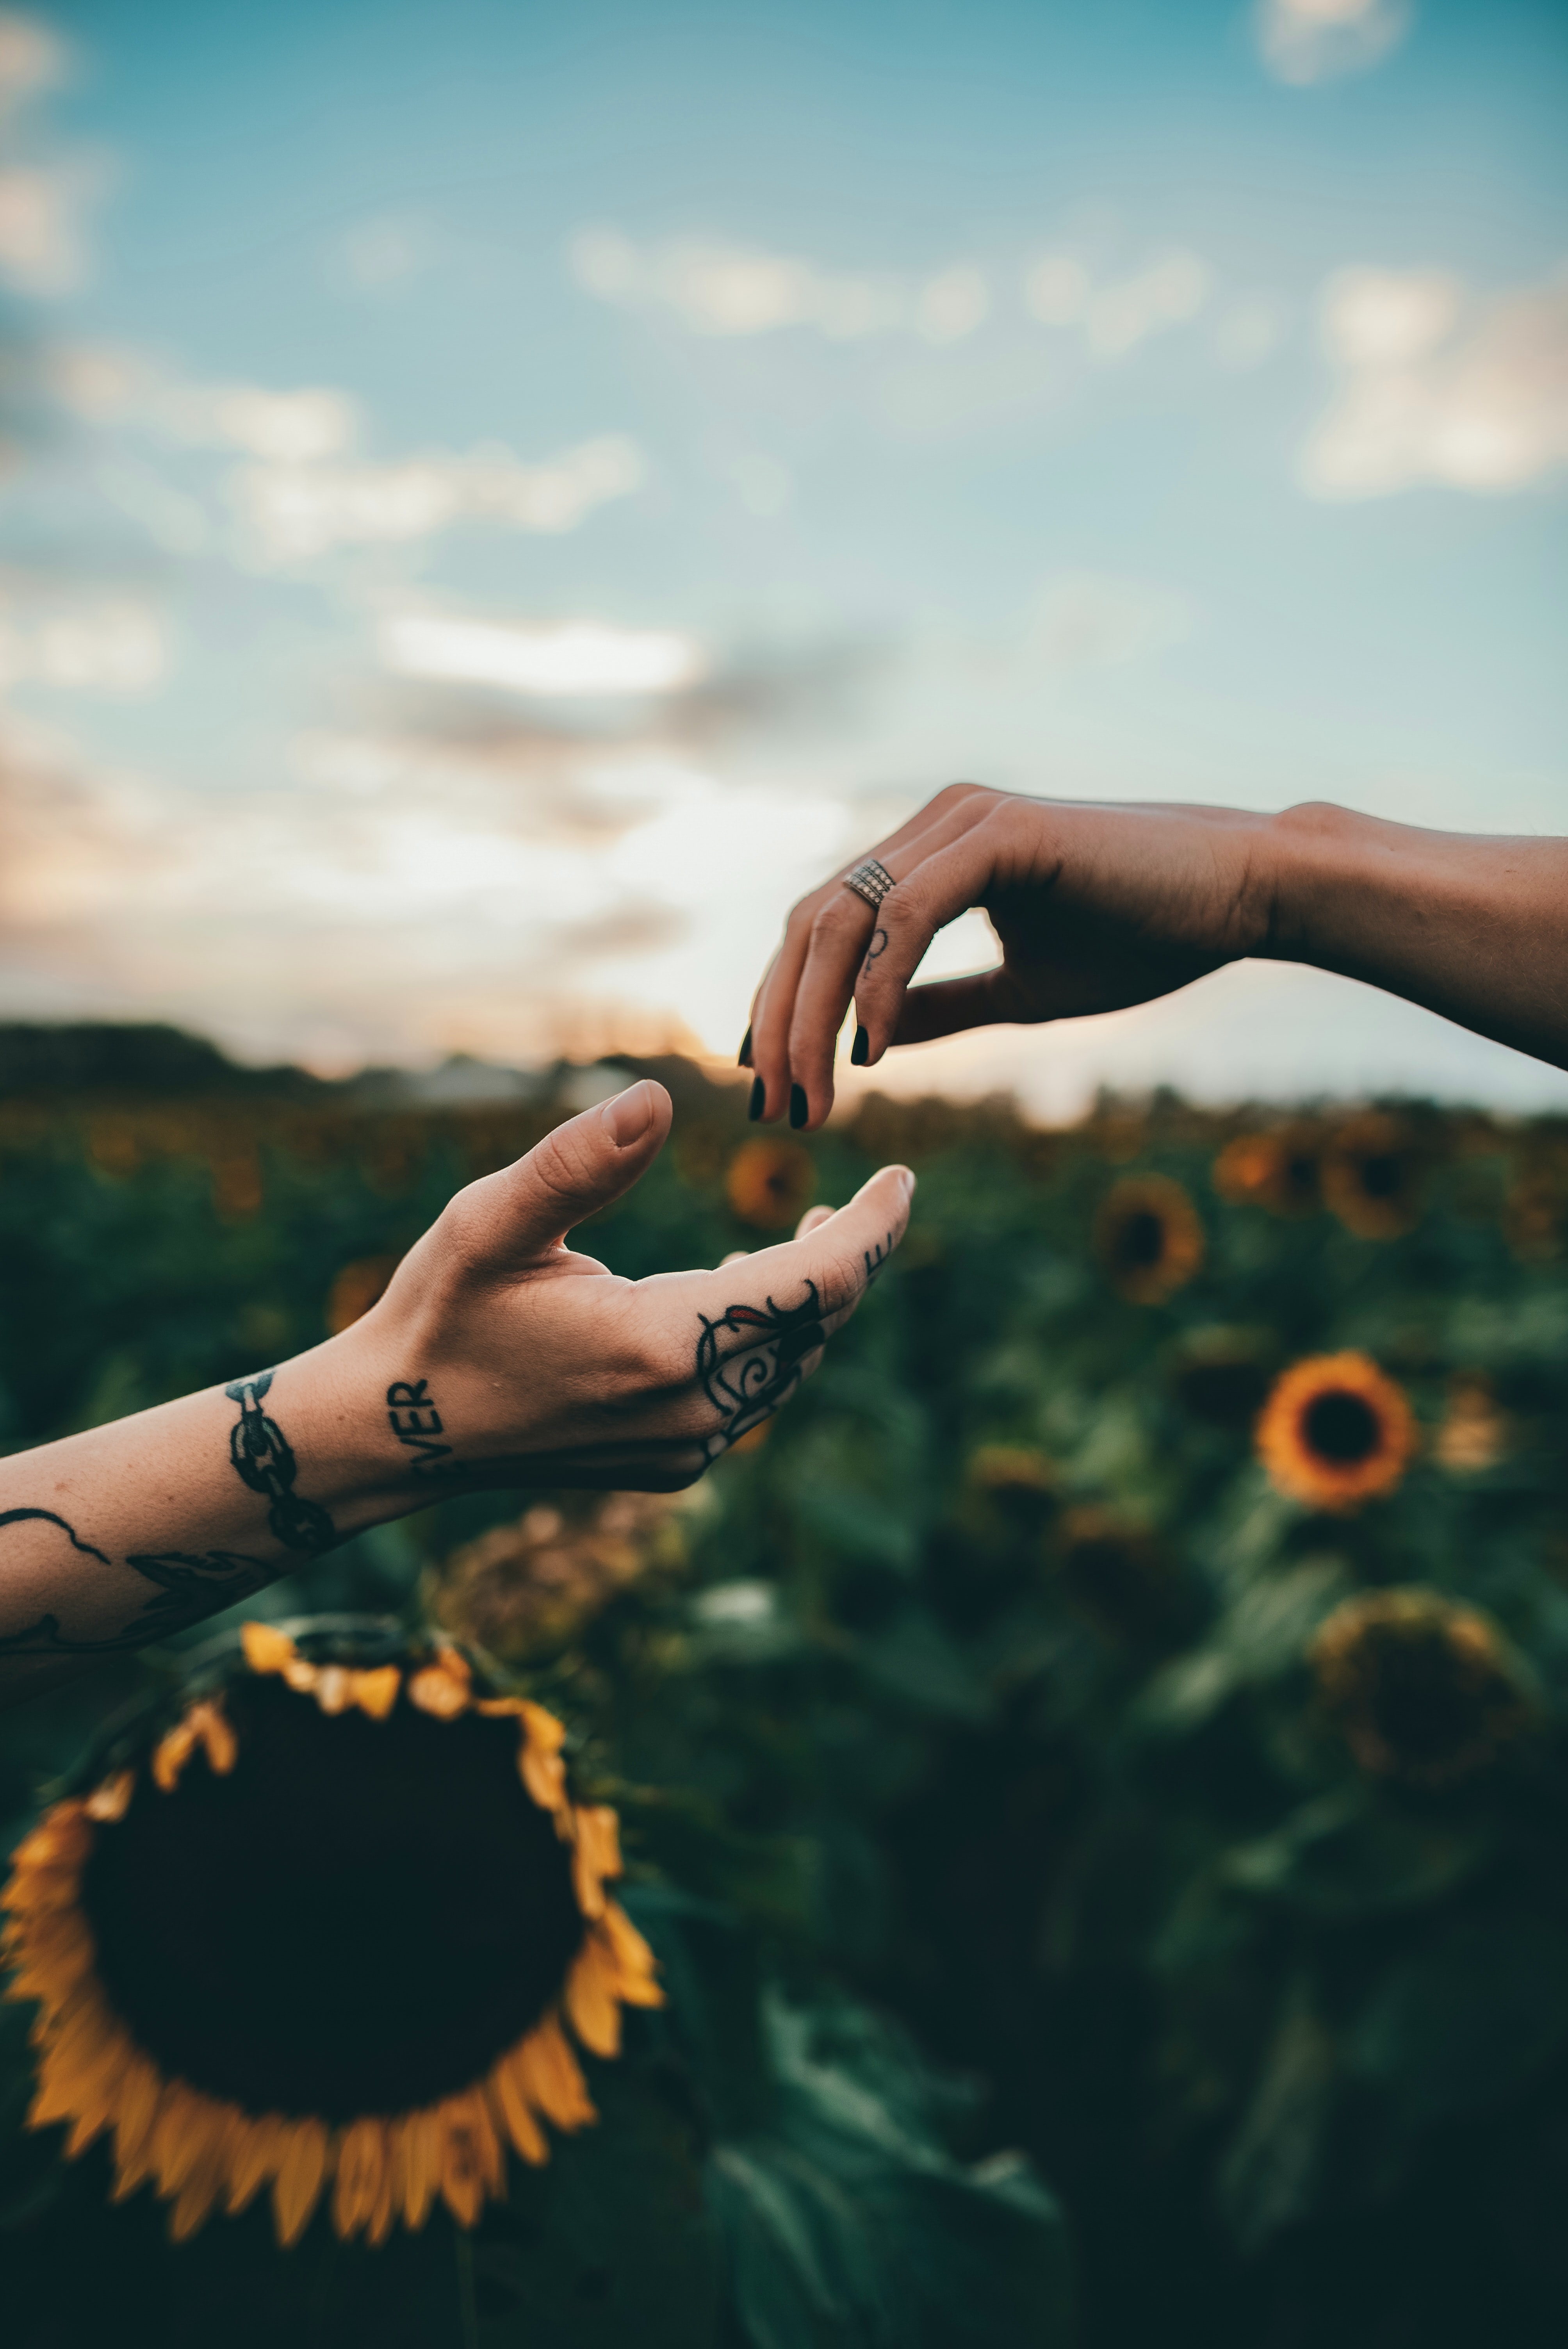 sunflowers, tattoo, tattoos, miscellaneous, touch, miscellanea, hands, touching